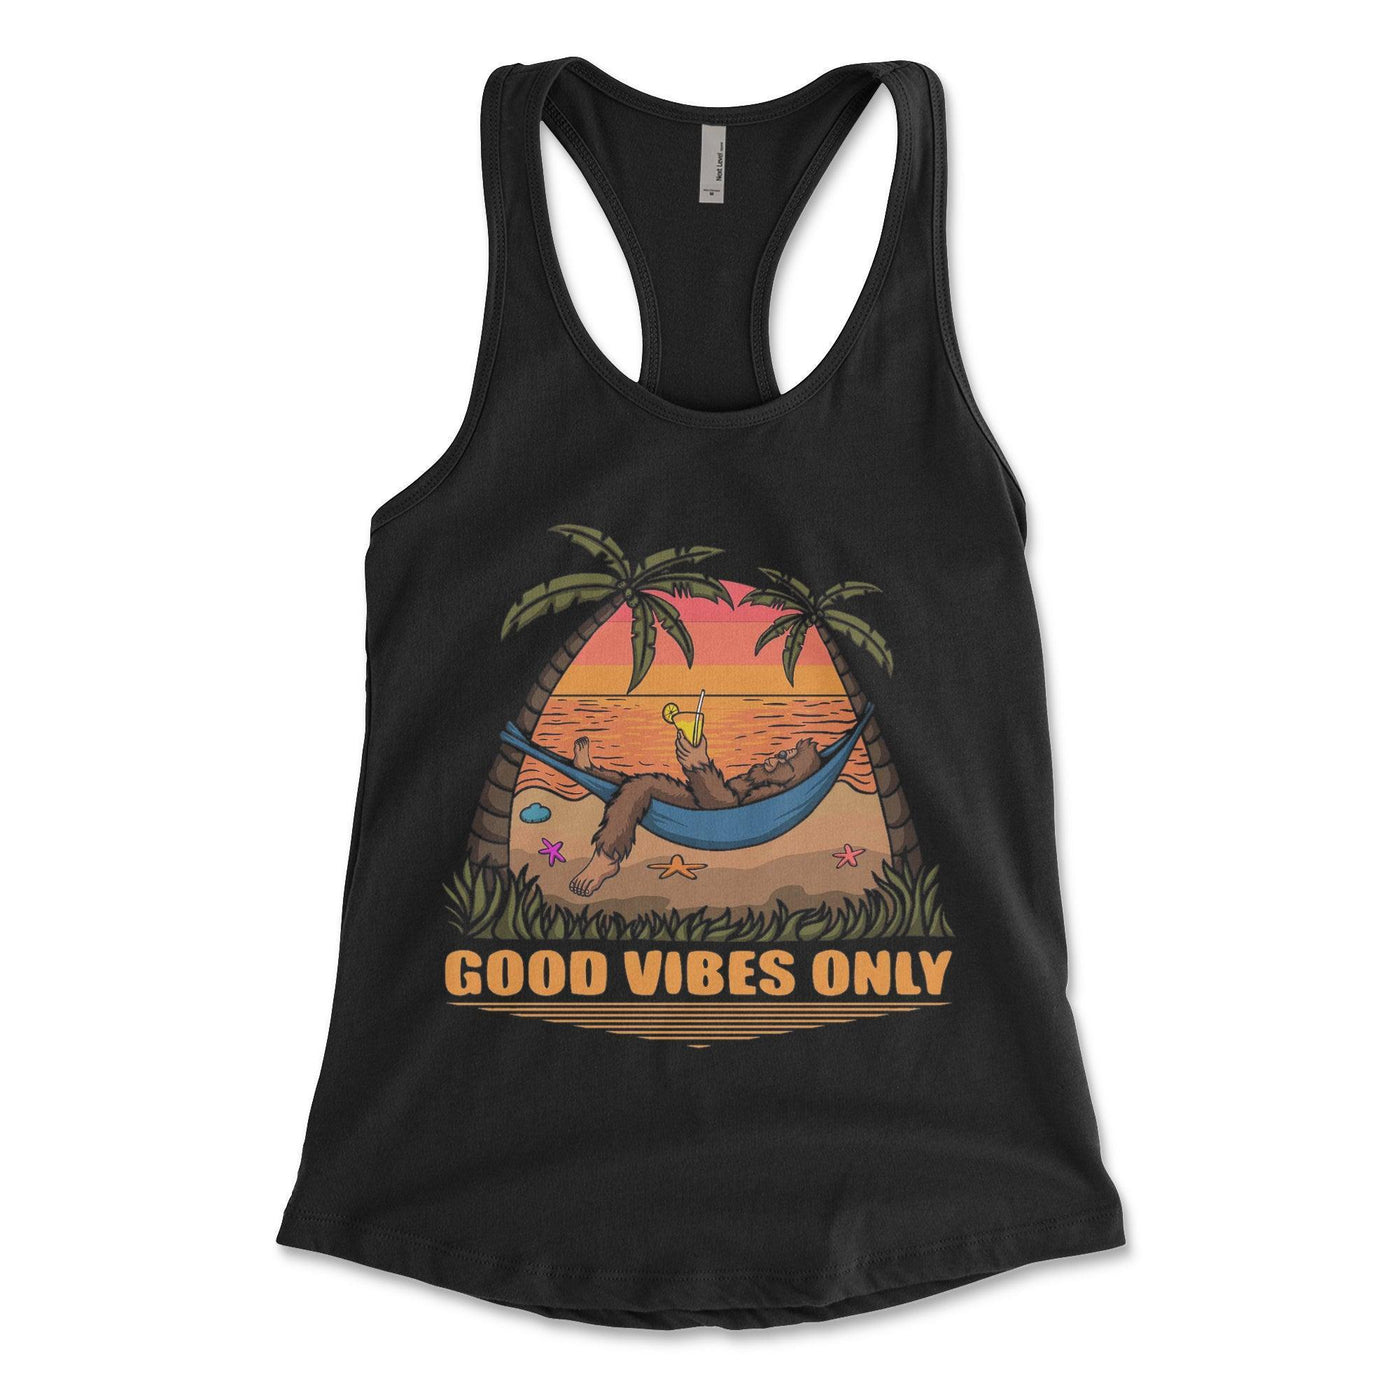 Good Vibes Only Women's Racerback Tank Top - Goats Trail